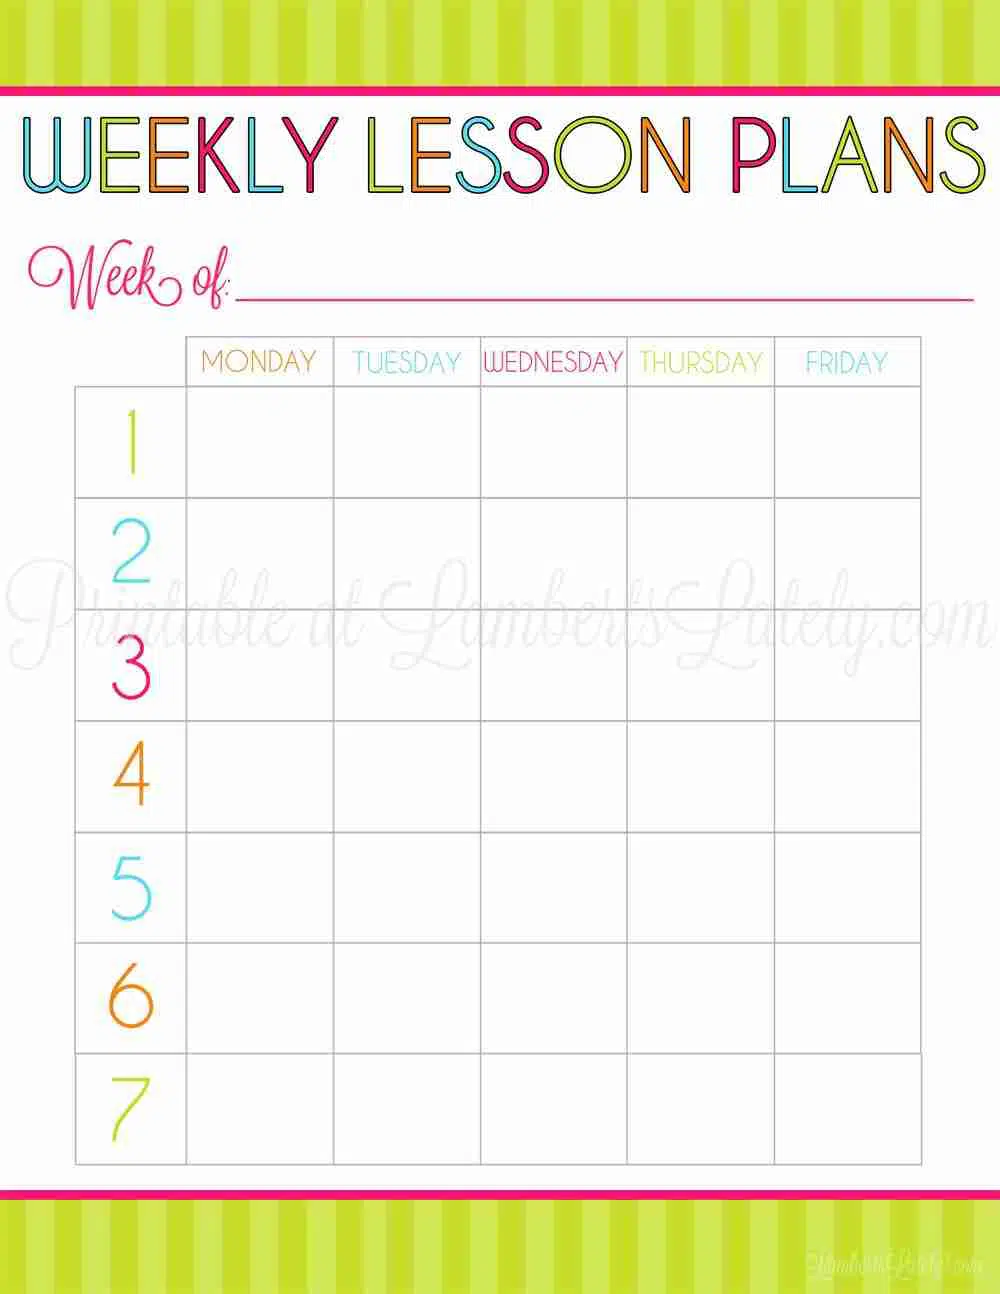 weekly lesson plans printable.